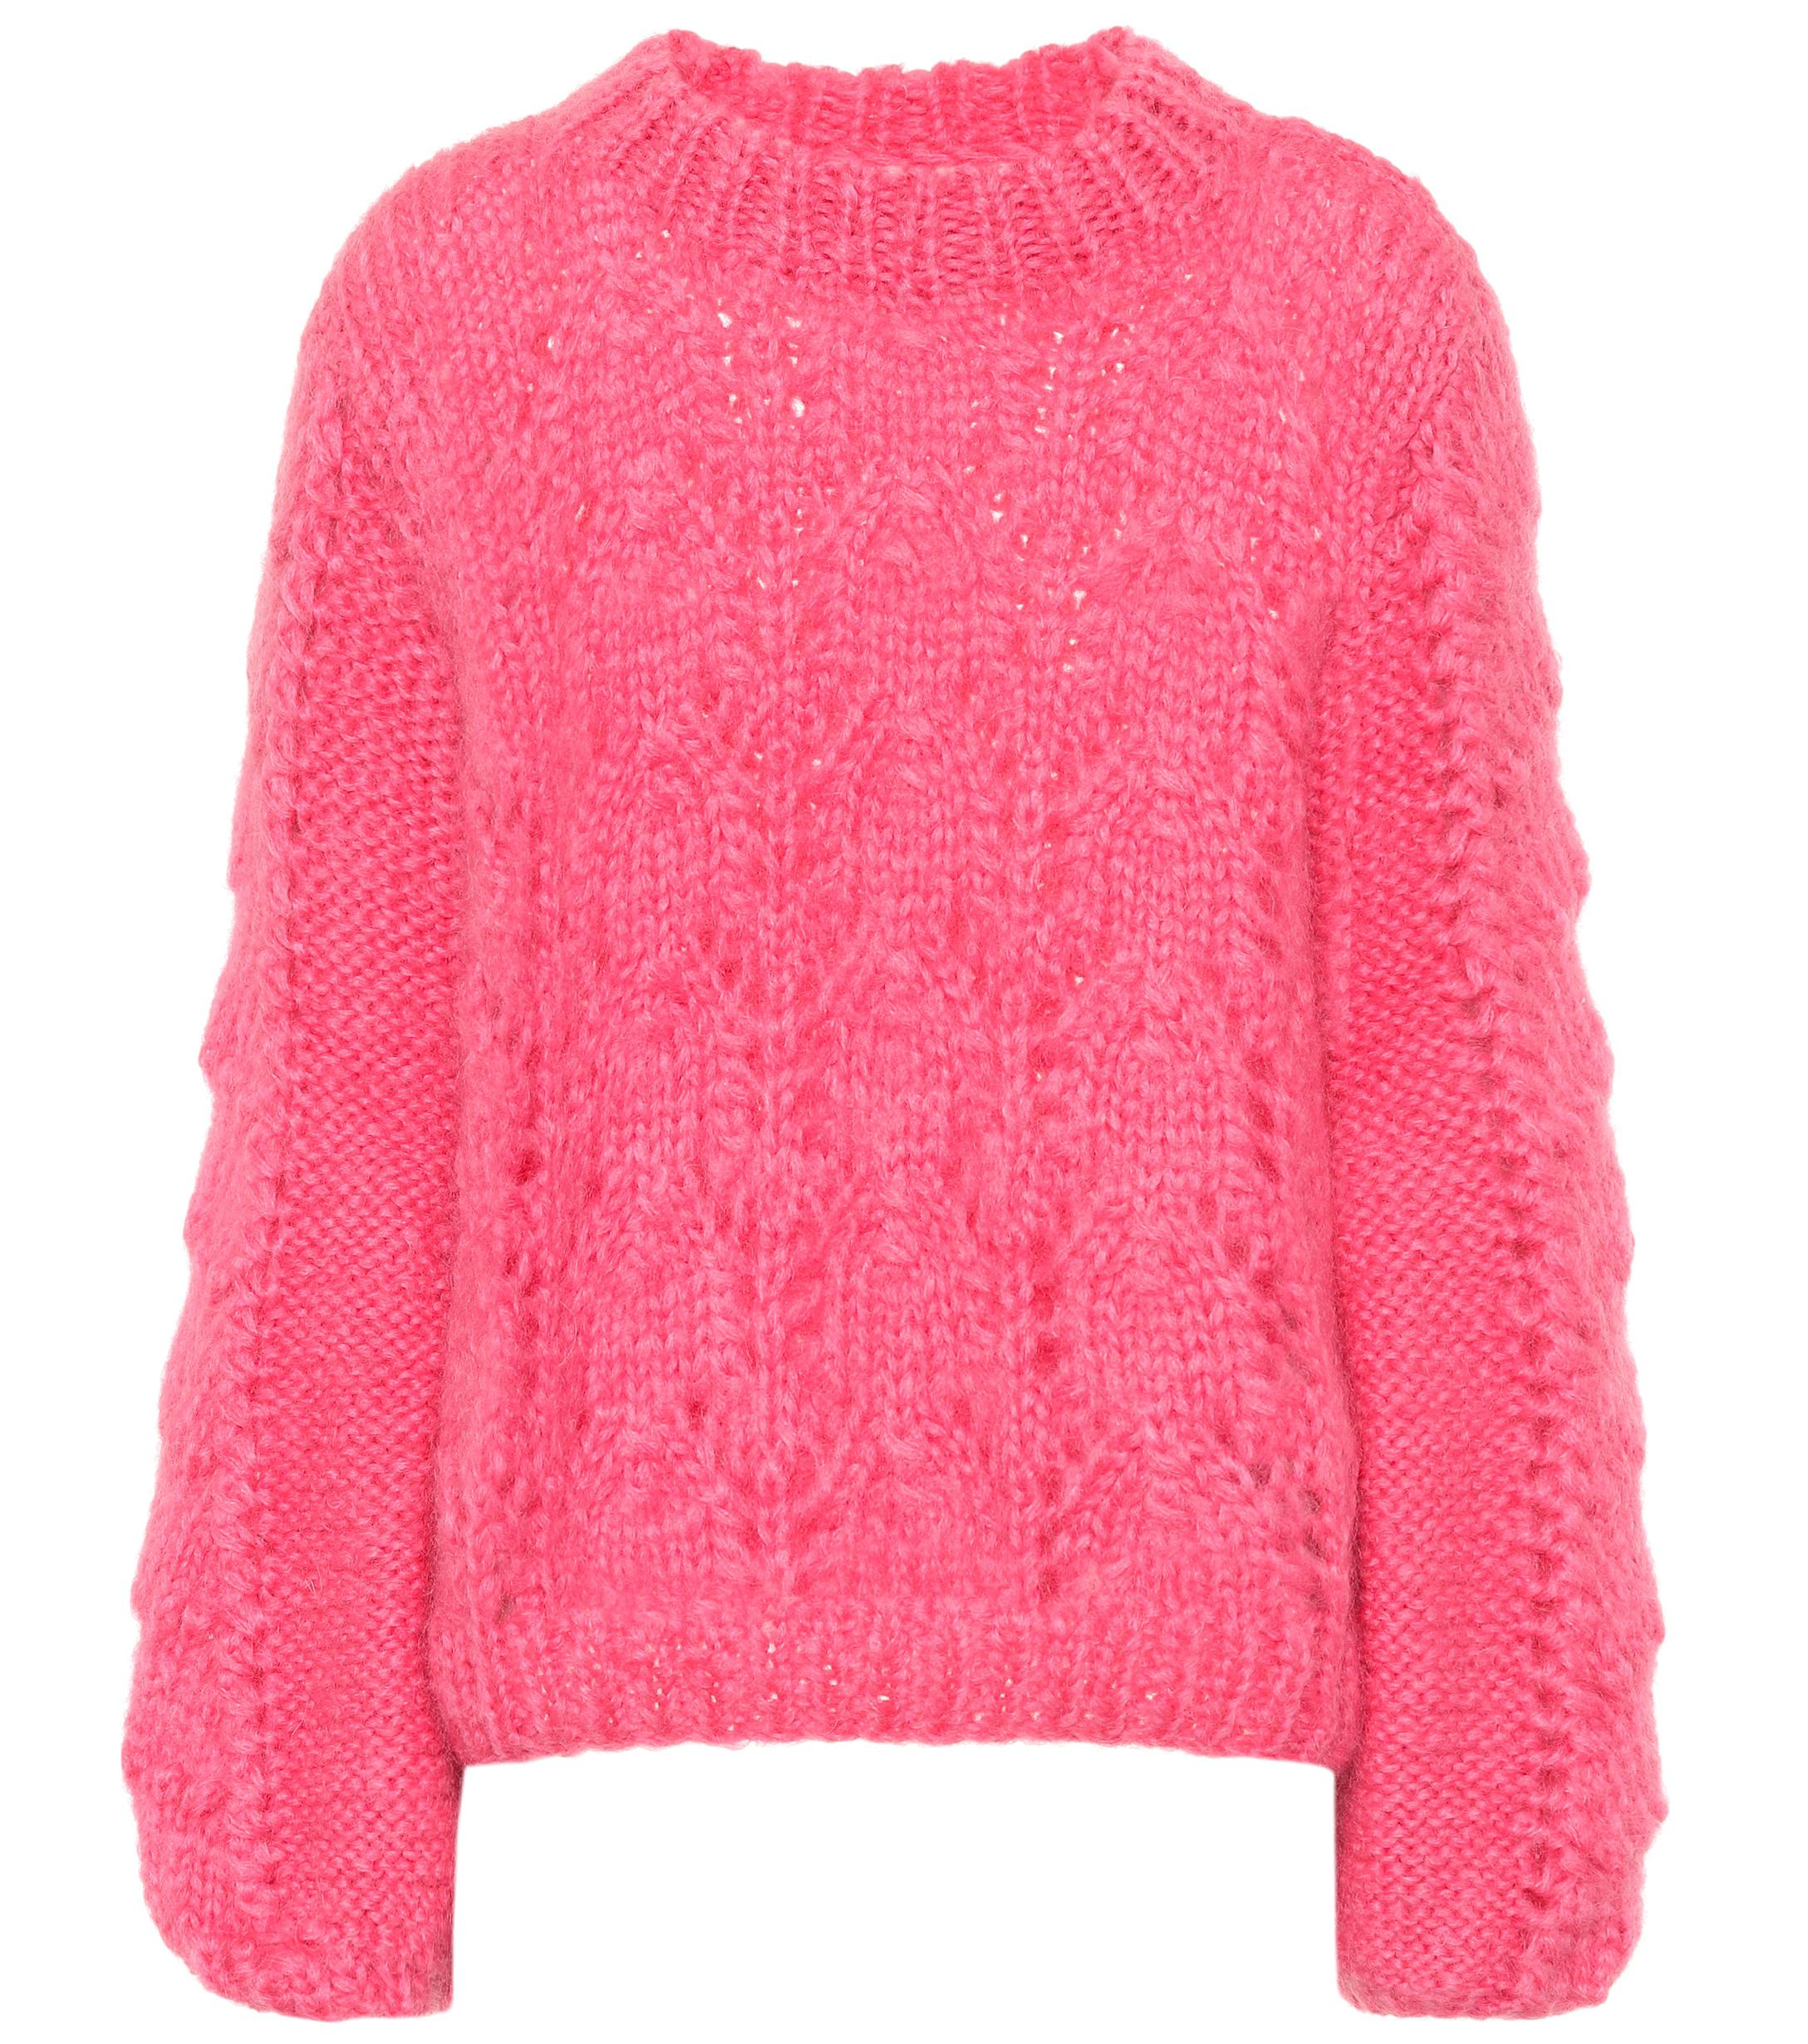 Ganni Julliard Mohair And Wool Sweater in Pink - Lyst